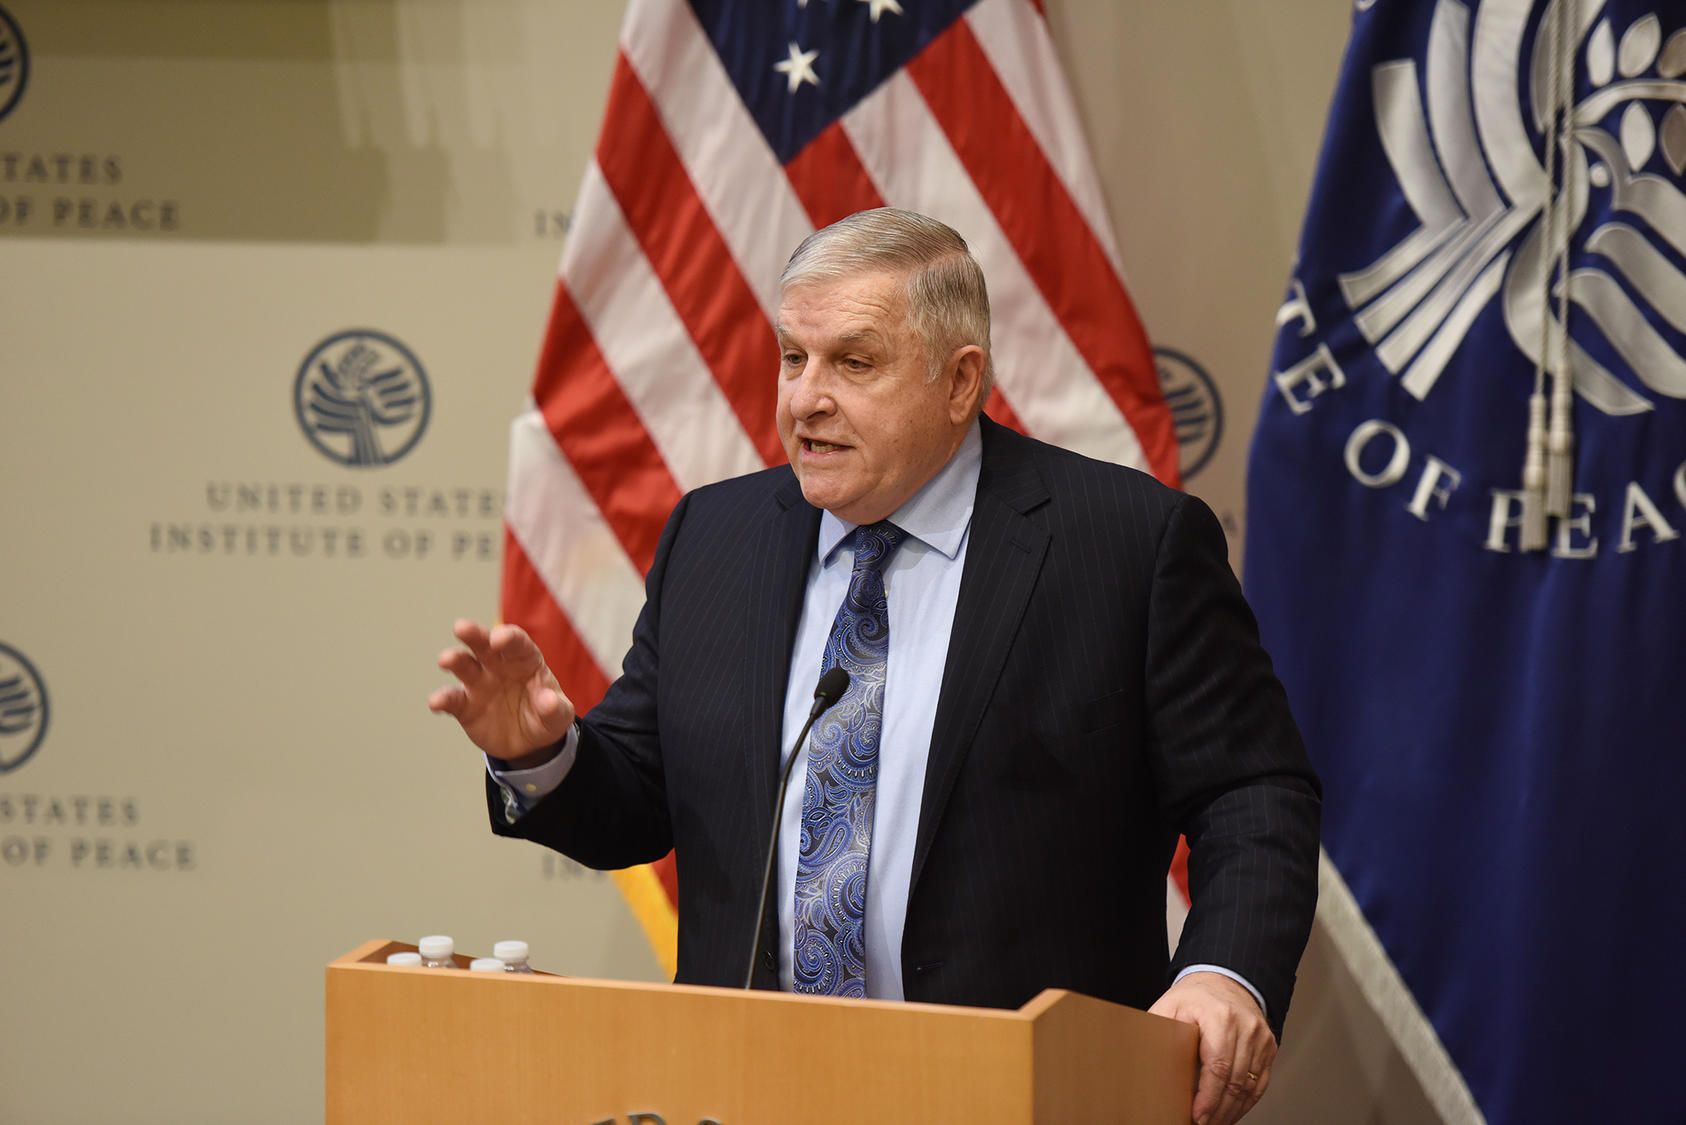 General (Ret.) Anthony Zinni at the U.S. Institute of Peace, October 24, 2018.